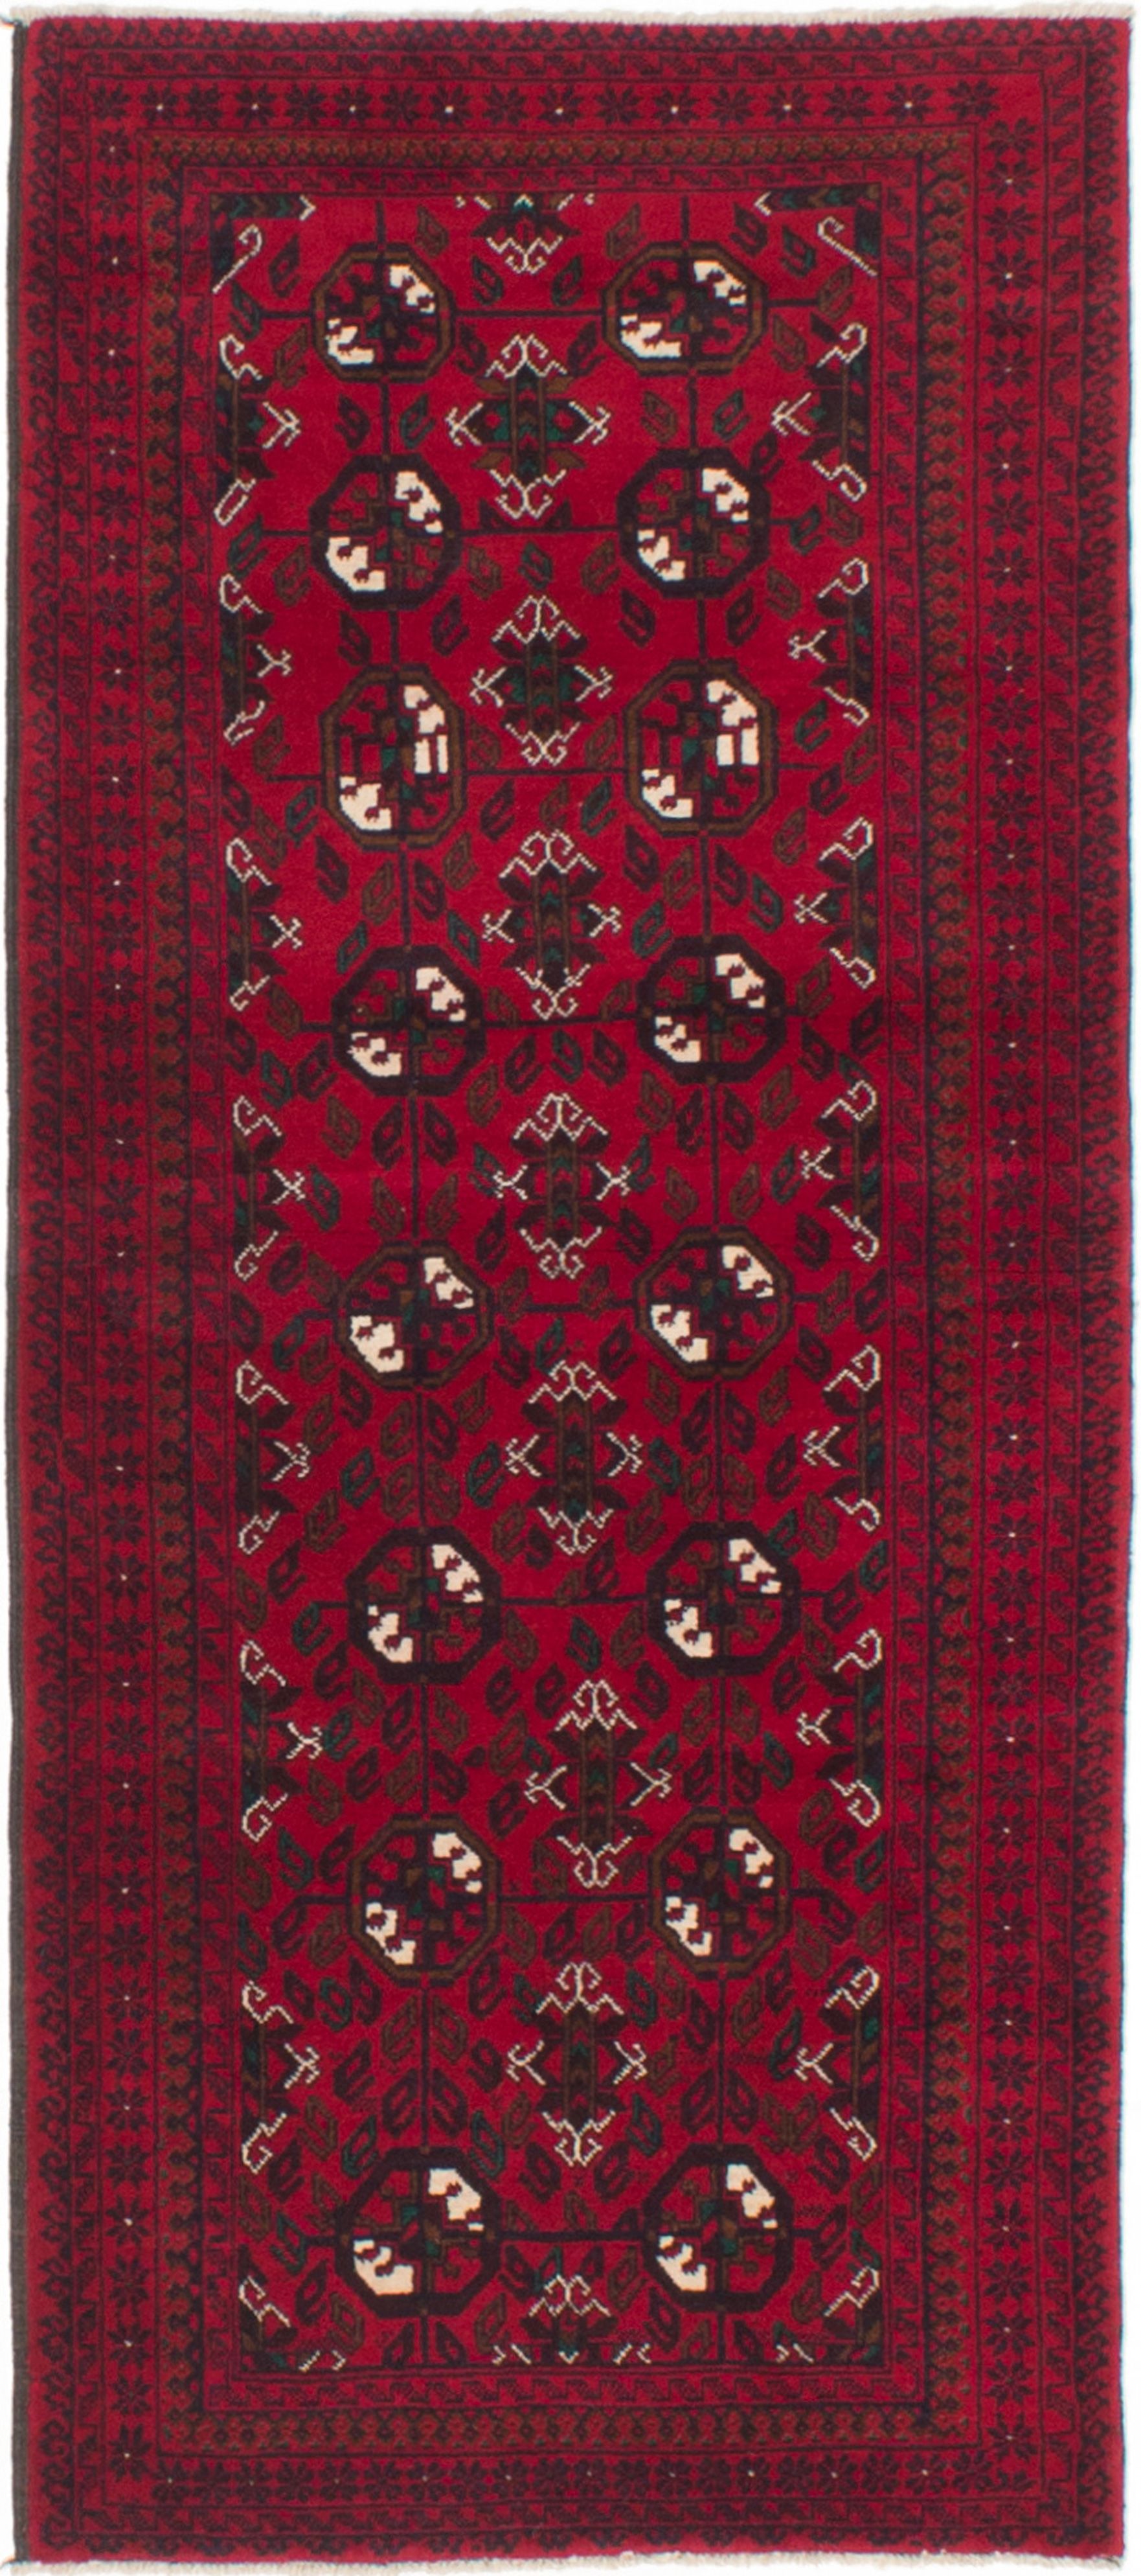 Hand-knotted Finest Rizbaft Dark Red Wool Rug 2'9" x 6'2" Size: 2'9" x 6'2"  